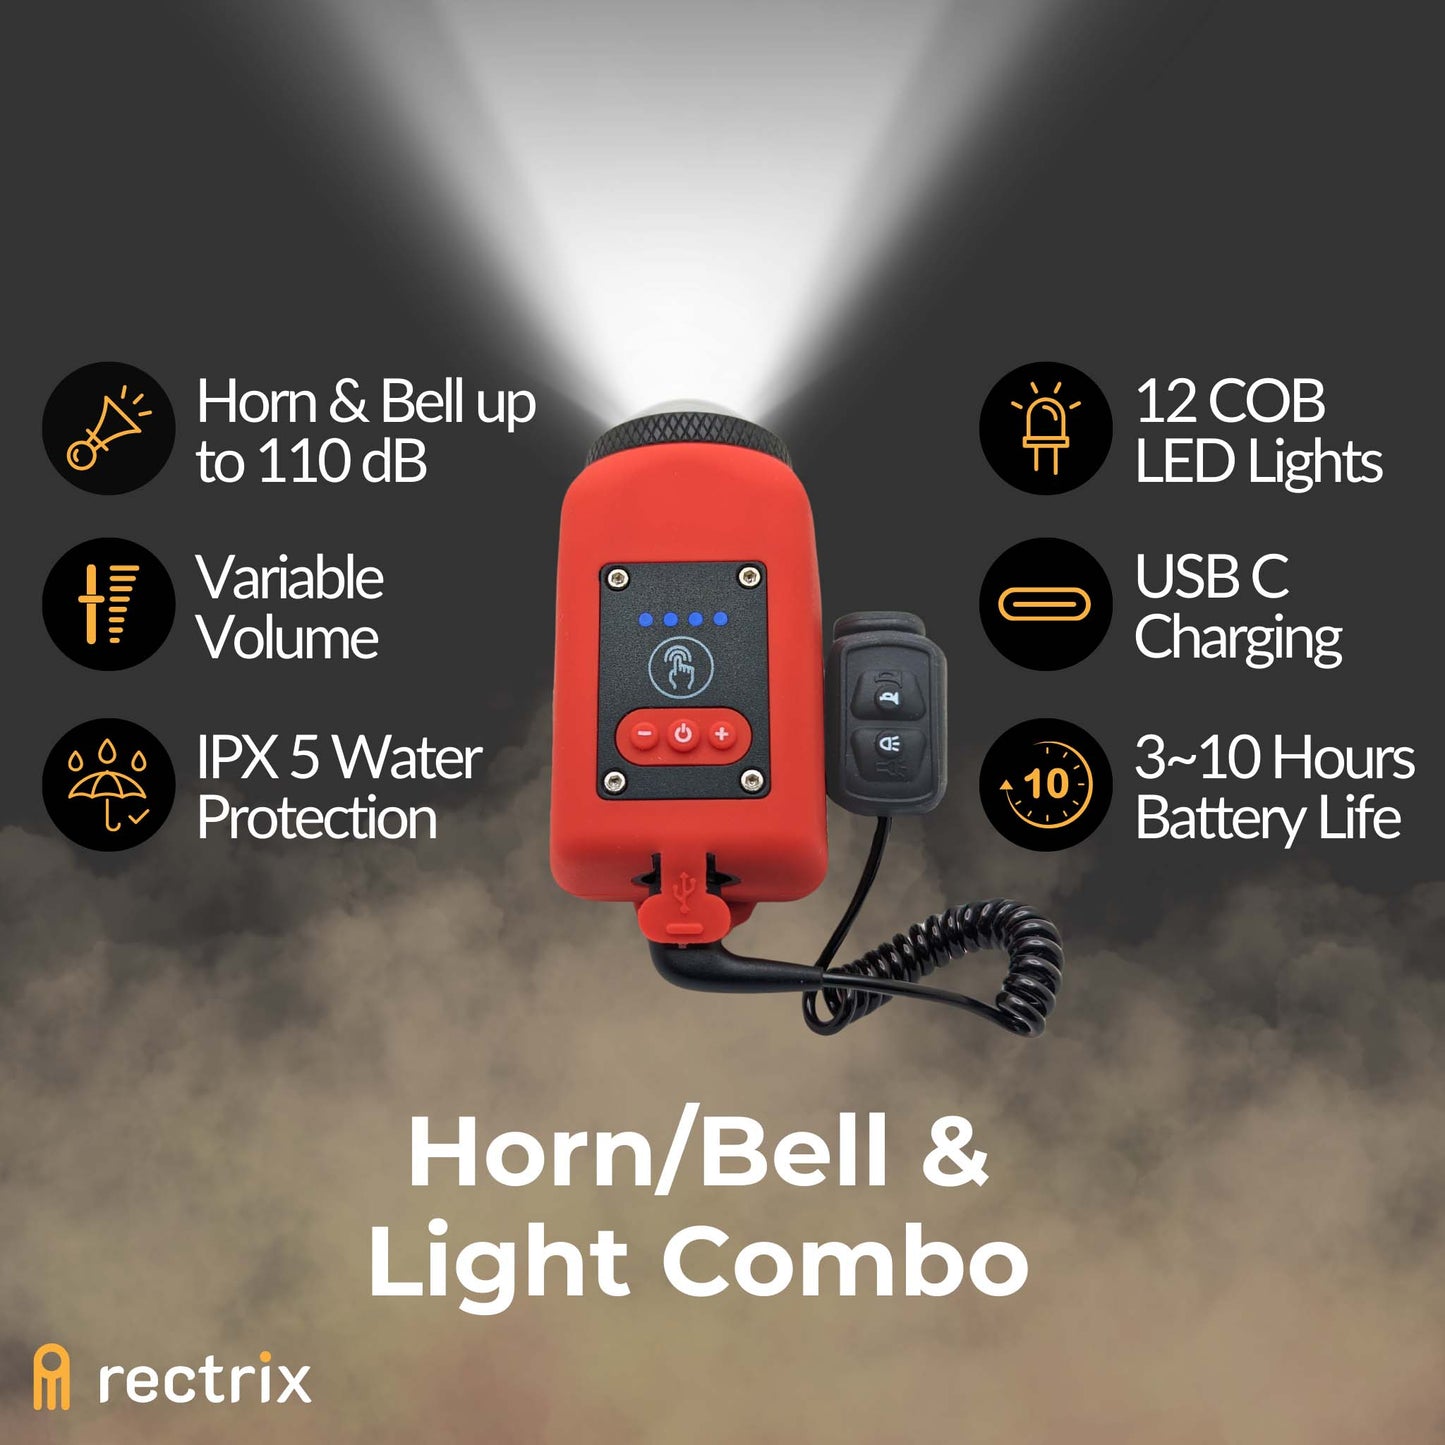 Highlighting key features of the bike horn/bell and light combo